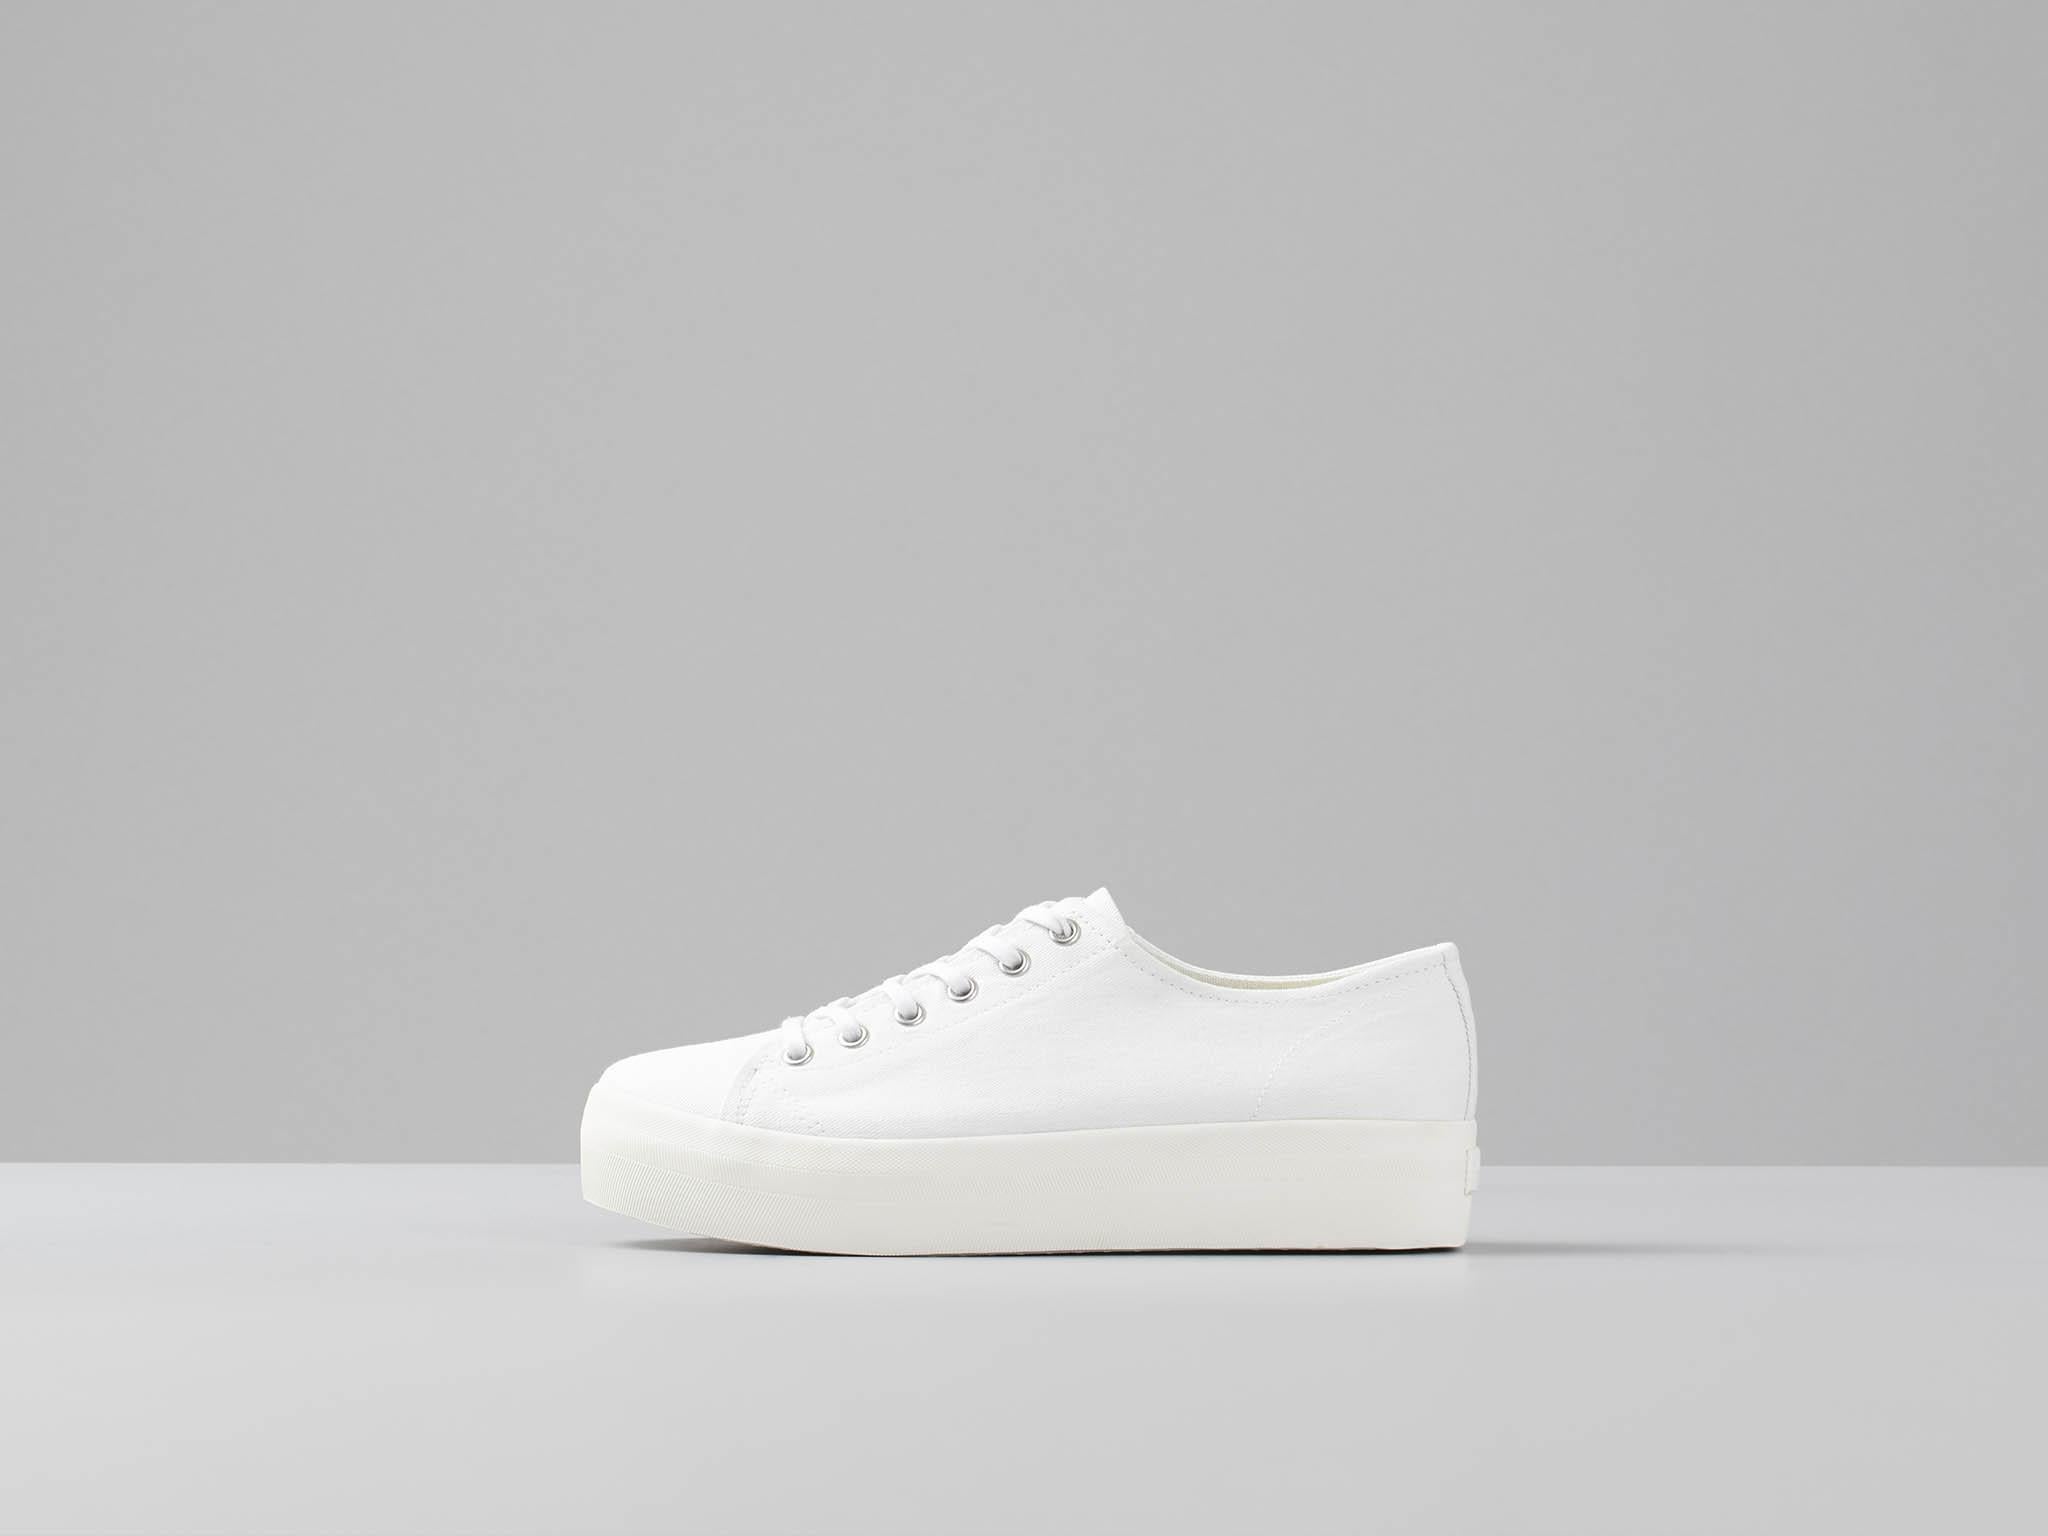 Best women's white trainers: From 